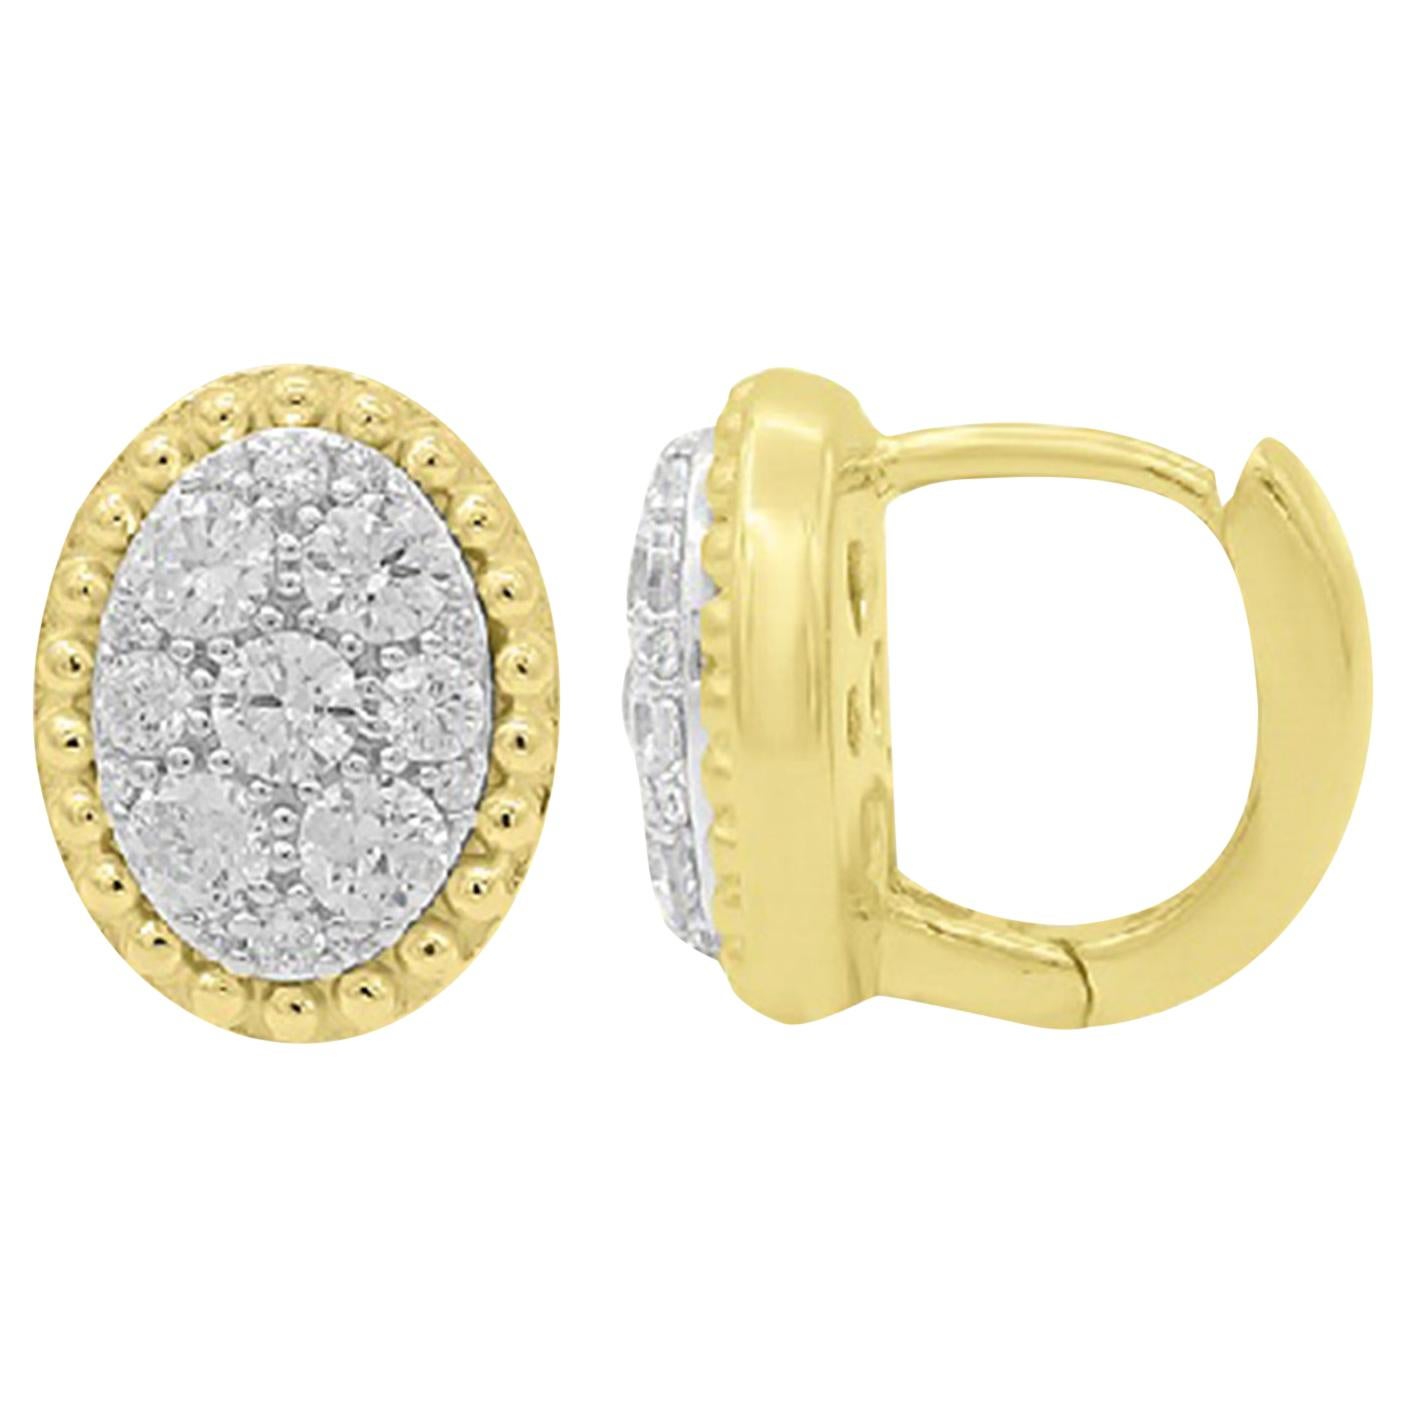 TJD 0.50 Carat Round Diamond 14K Yellow Gold Oval Shaped Cluster Stud Earrings